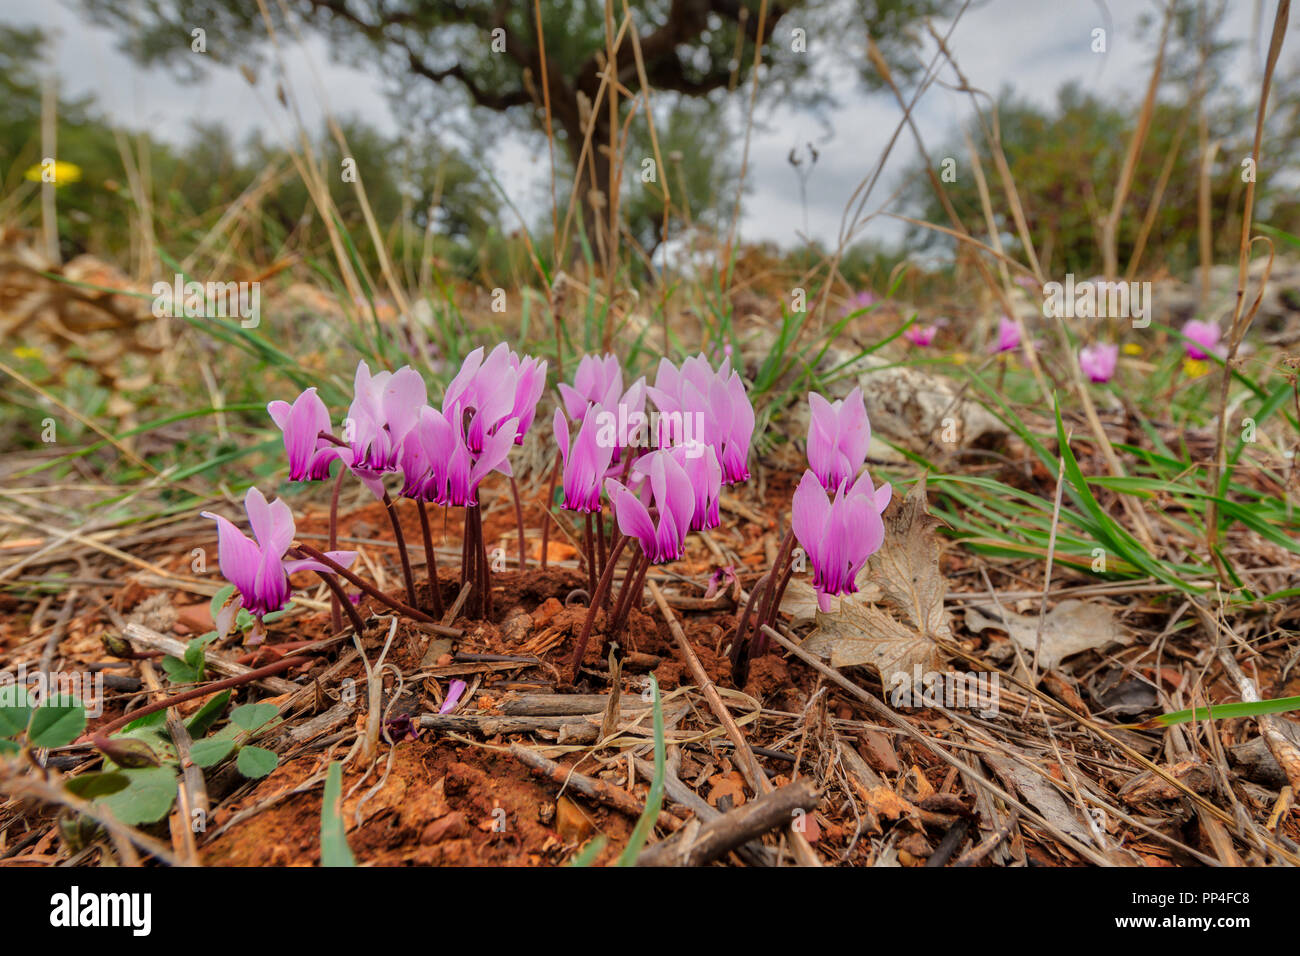 Group of Ivy-leaved cyclamen or sowbread (Cyclamen hederifolium) in olive orchard habitat on Peloponnese peninsula, Greece Stock Photo